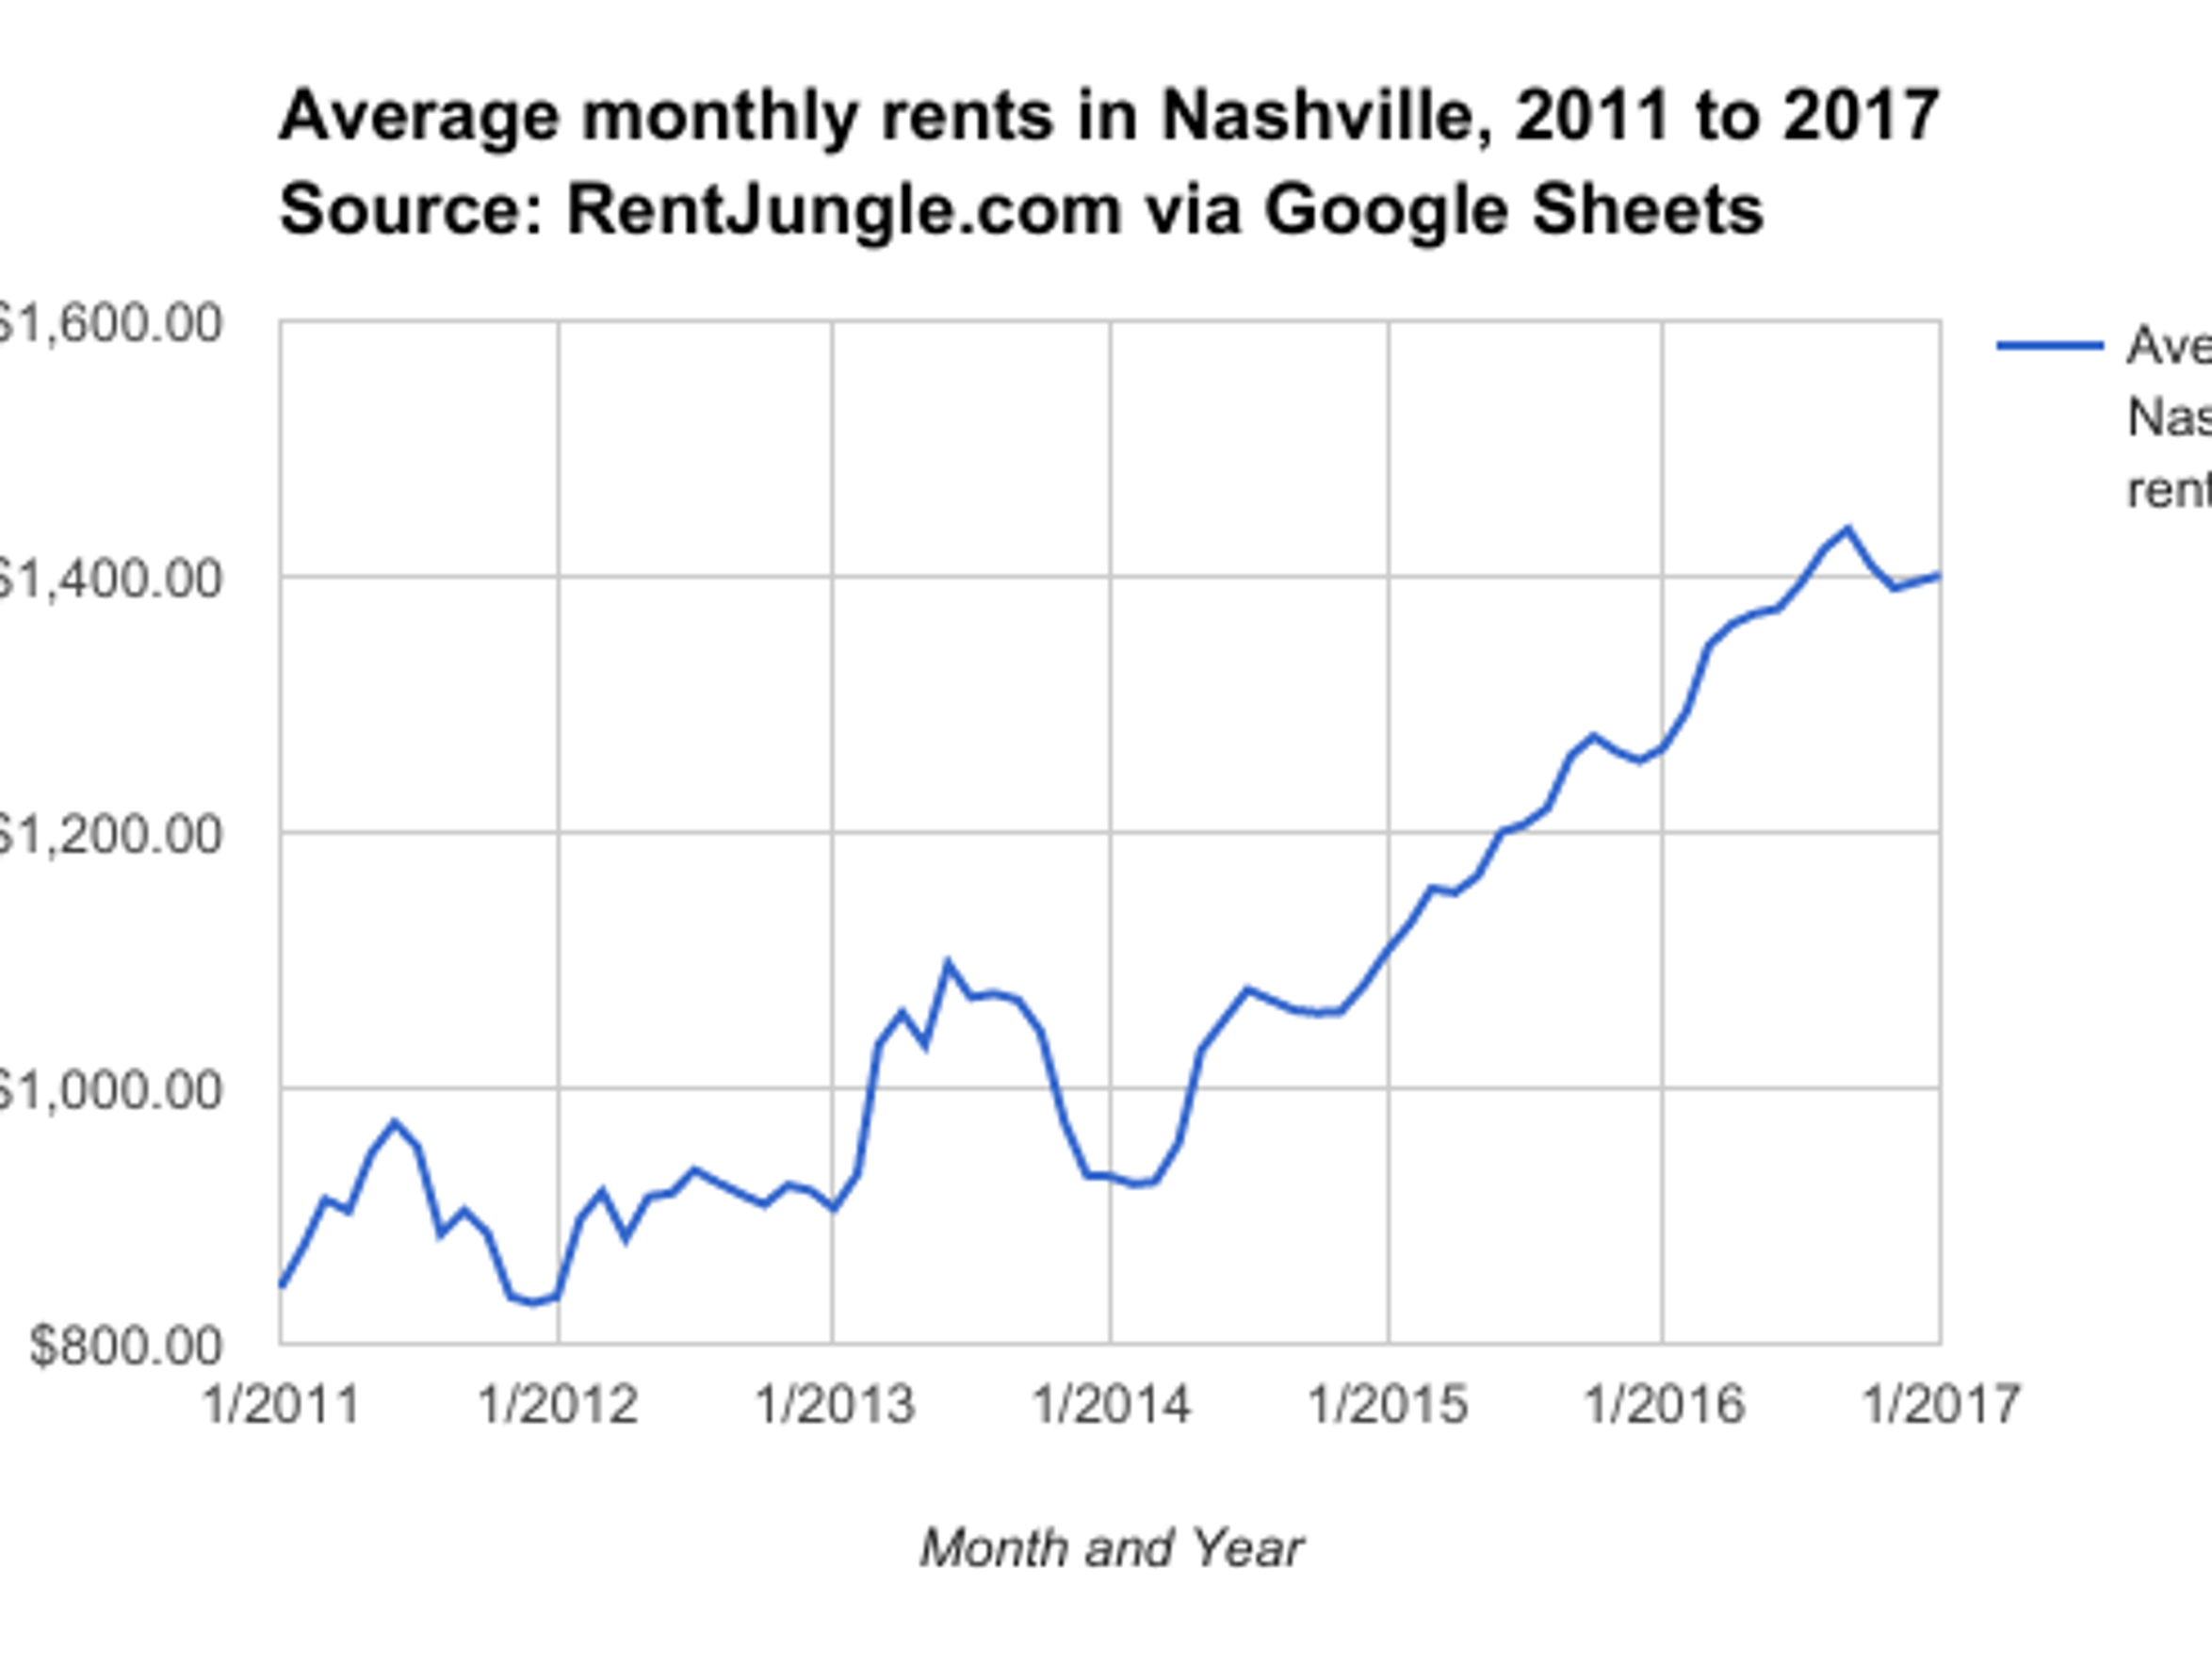 Average monthly rents in Nashville increased by more